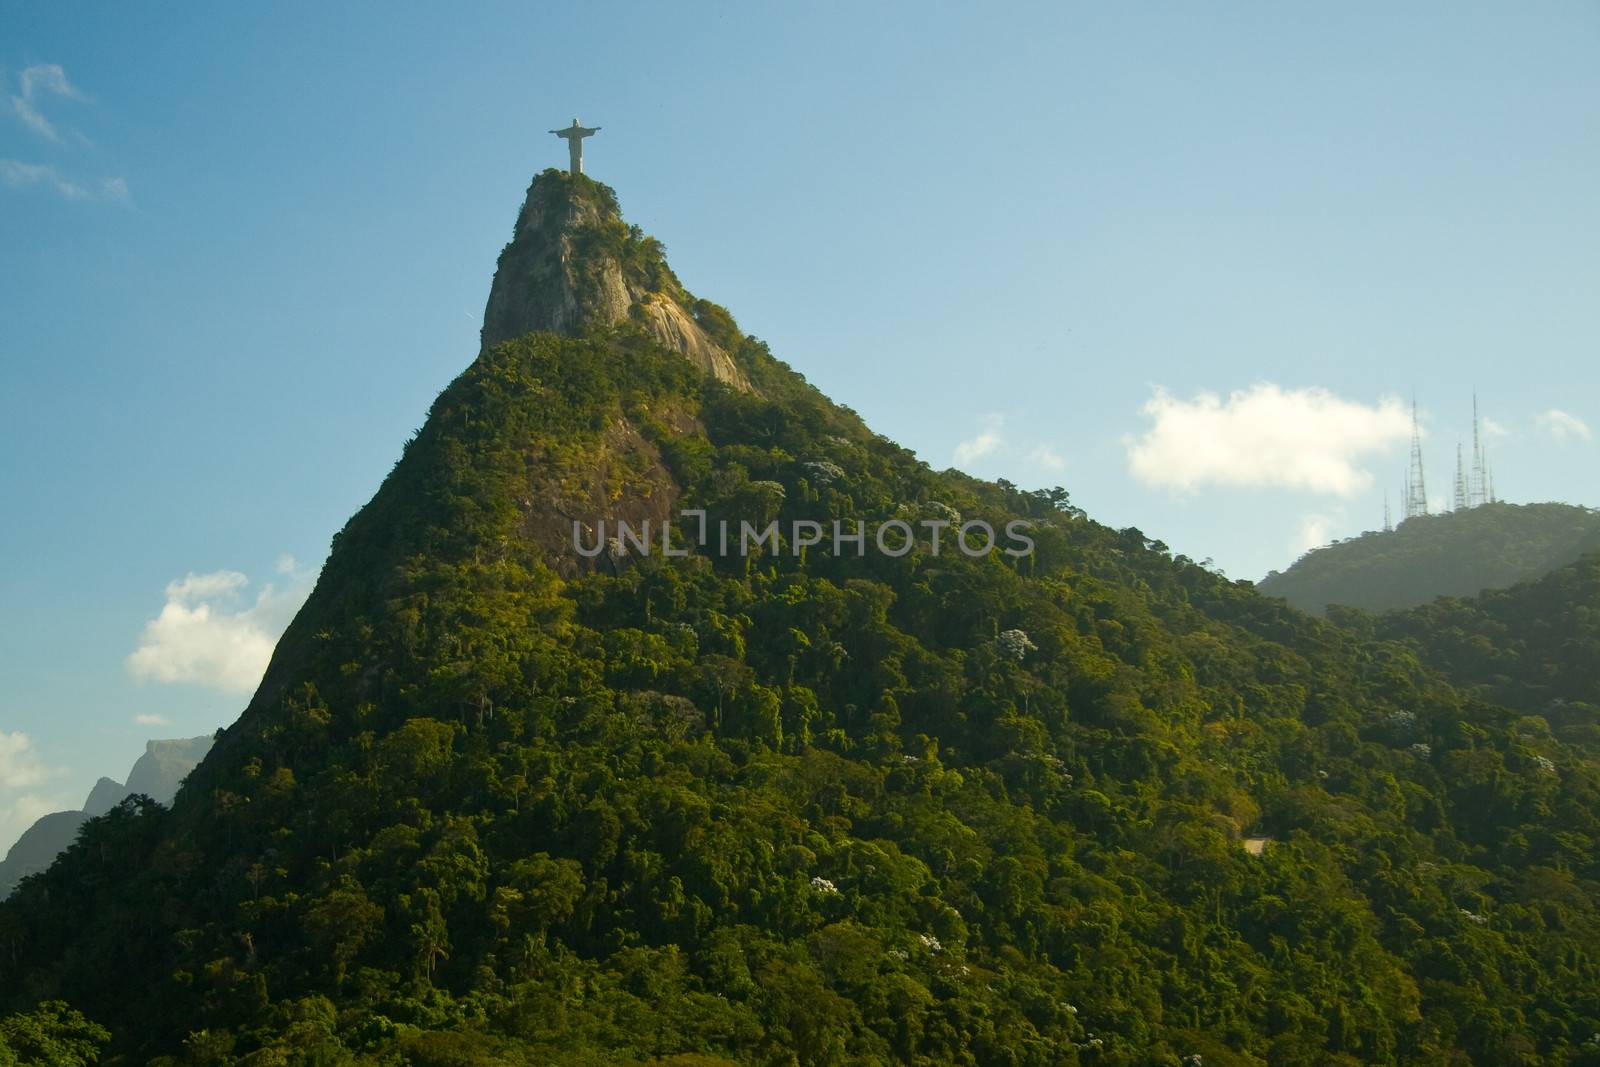 Christ the Redeemer on Corcovado Mountain by CelsoDiniz